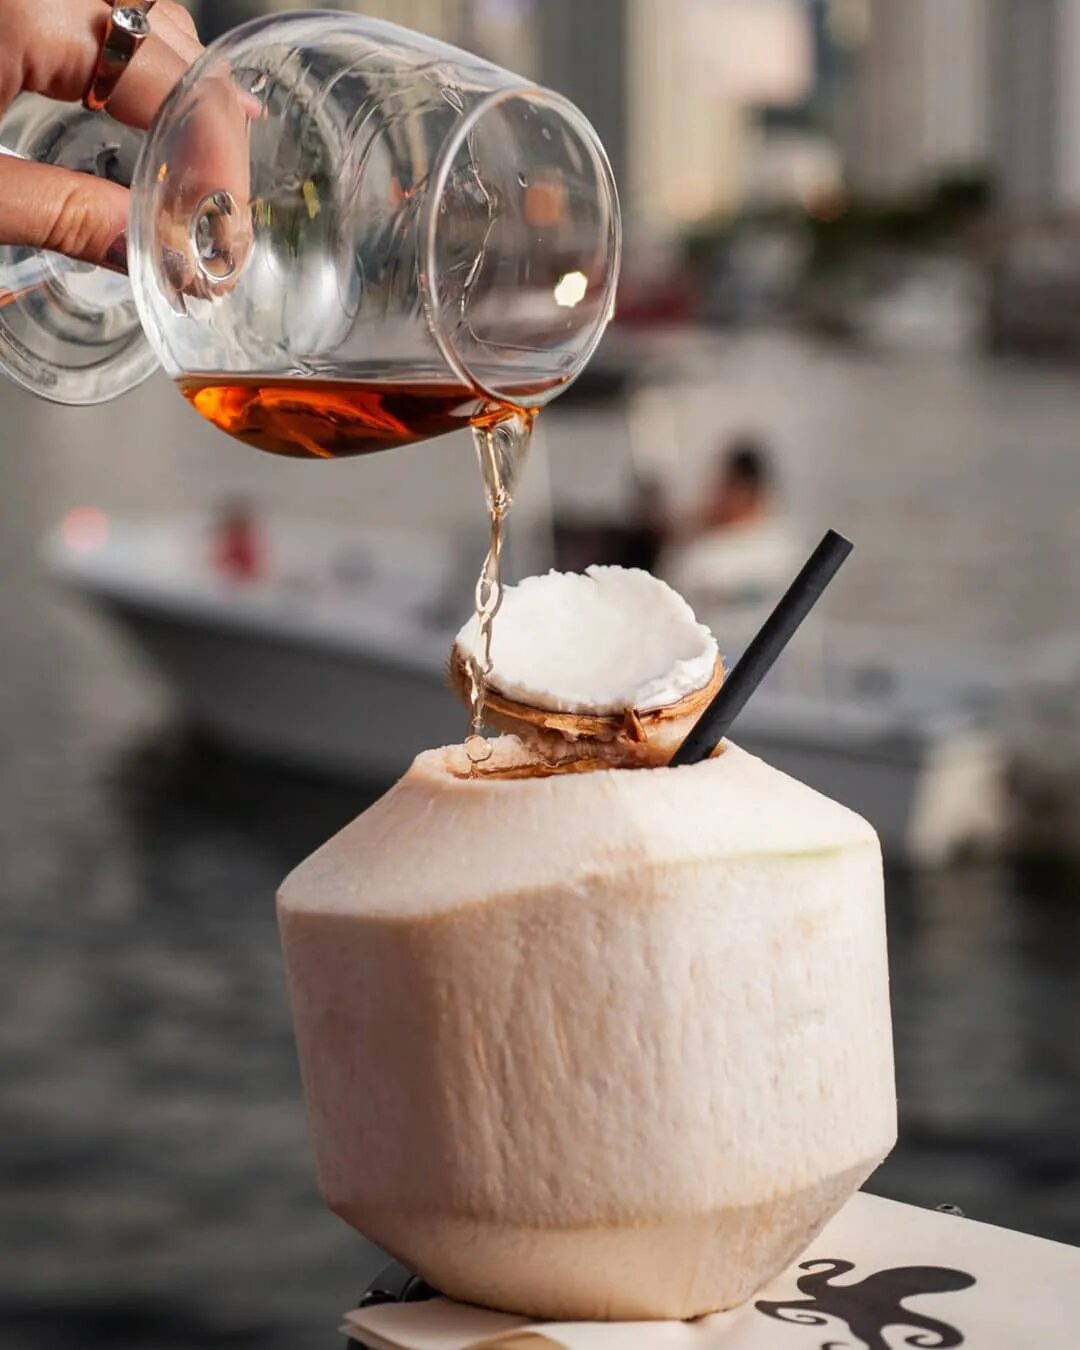 A guide to drinks: “Coco Loco 🥥 welcome to Miami where the heat is on 🌴😜...